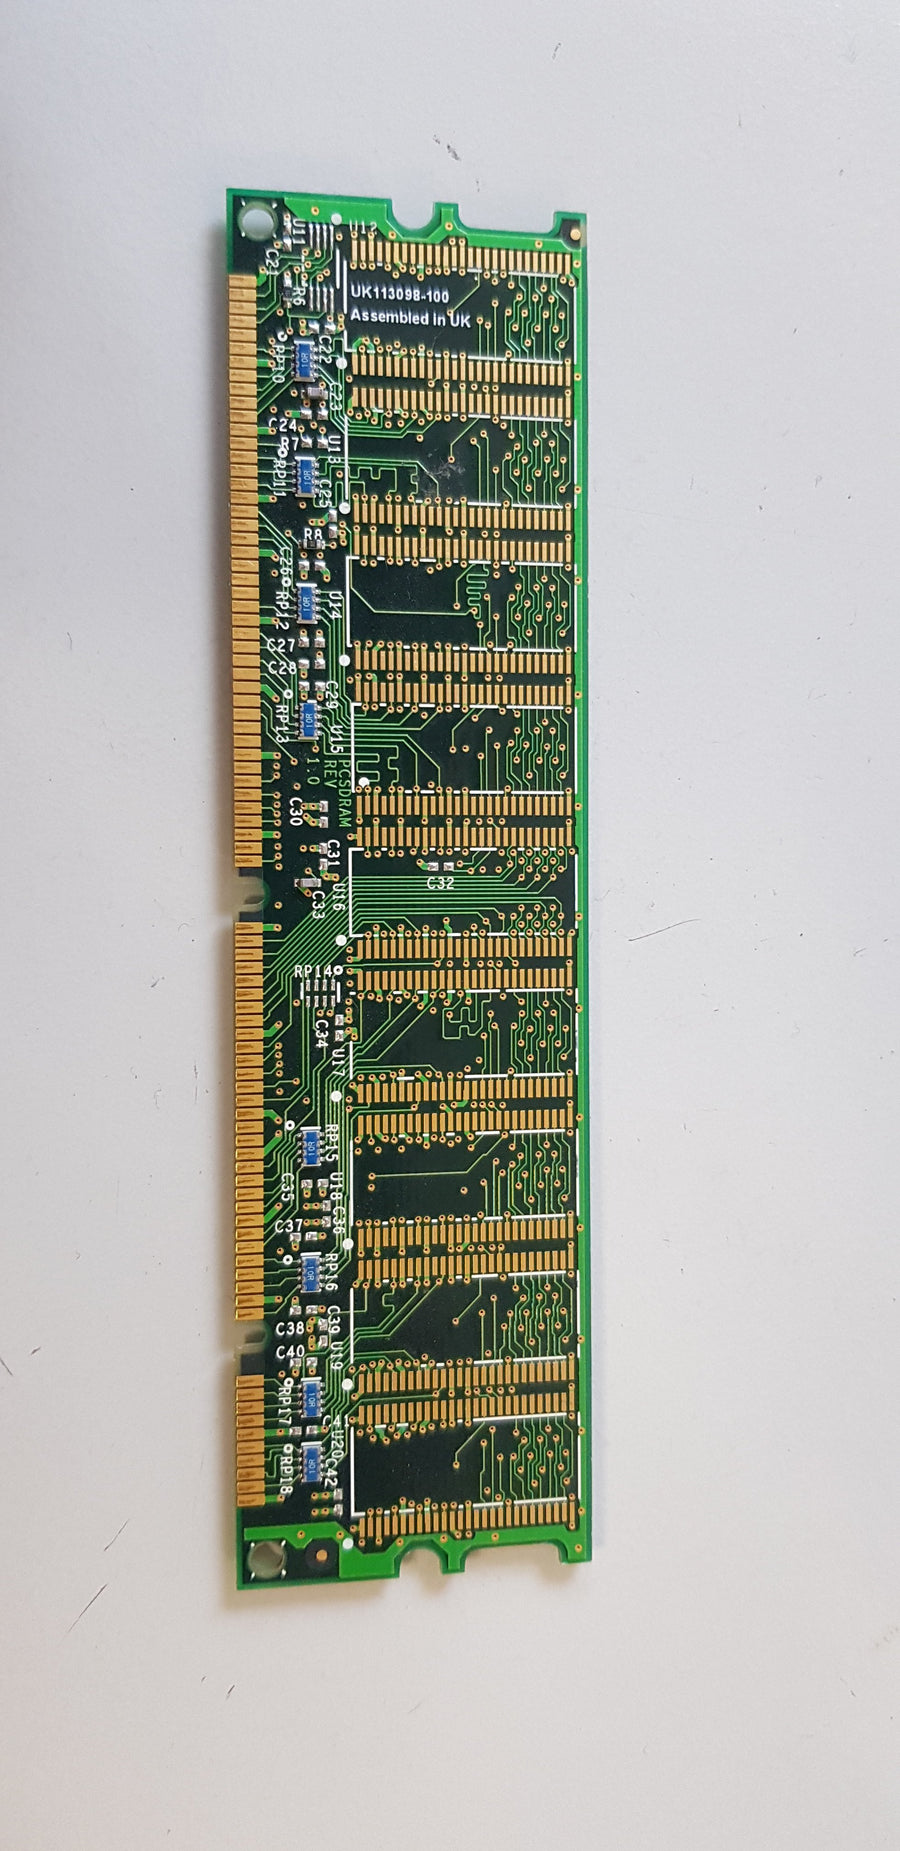 Compaq 64Mb DMS Certified PC100 CL2 168p 100Mhz DIMM Memory module ( 323012-001 )